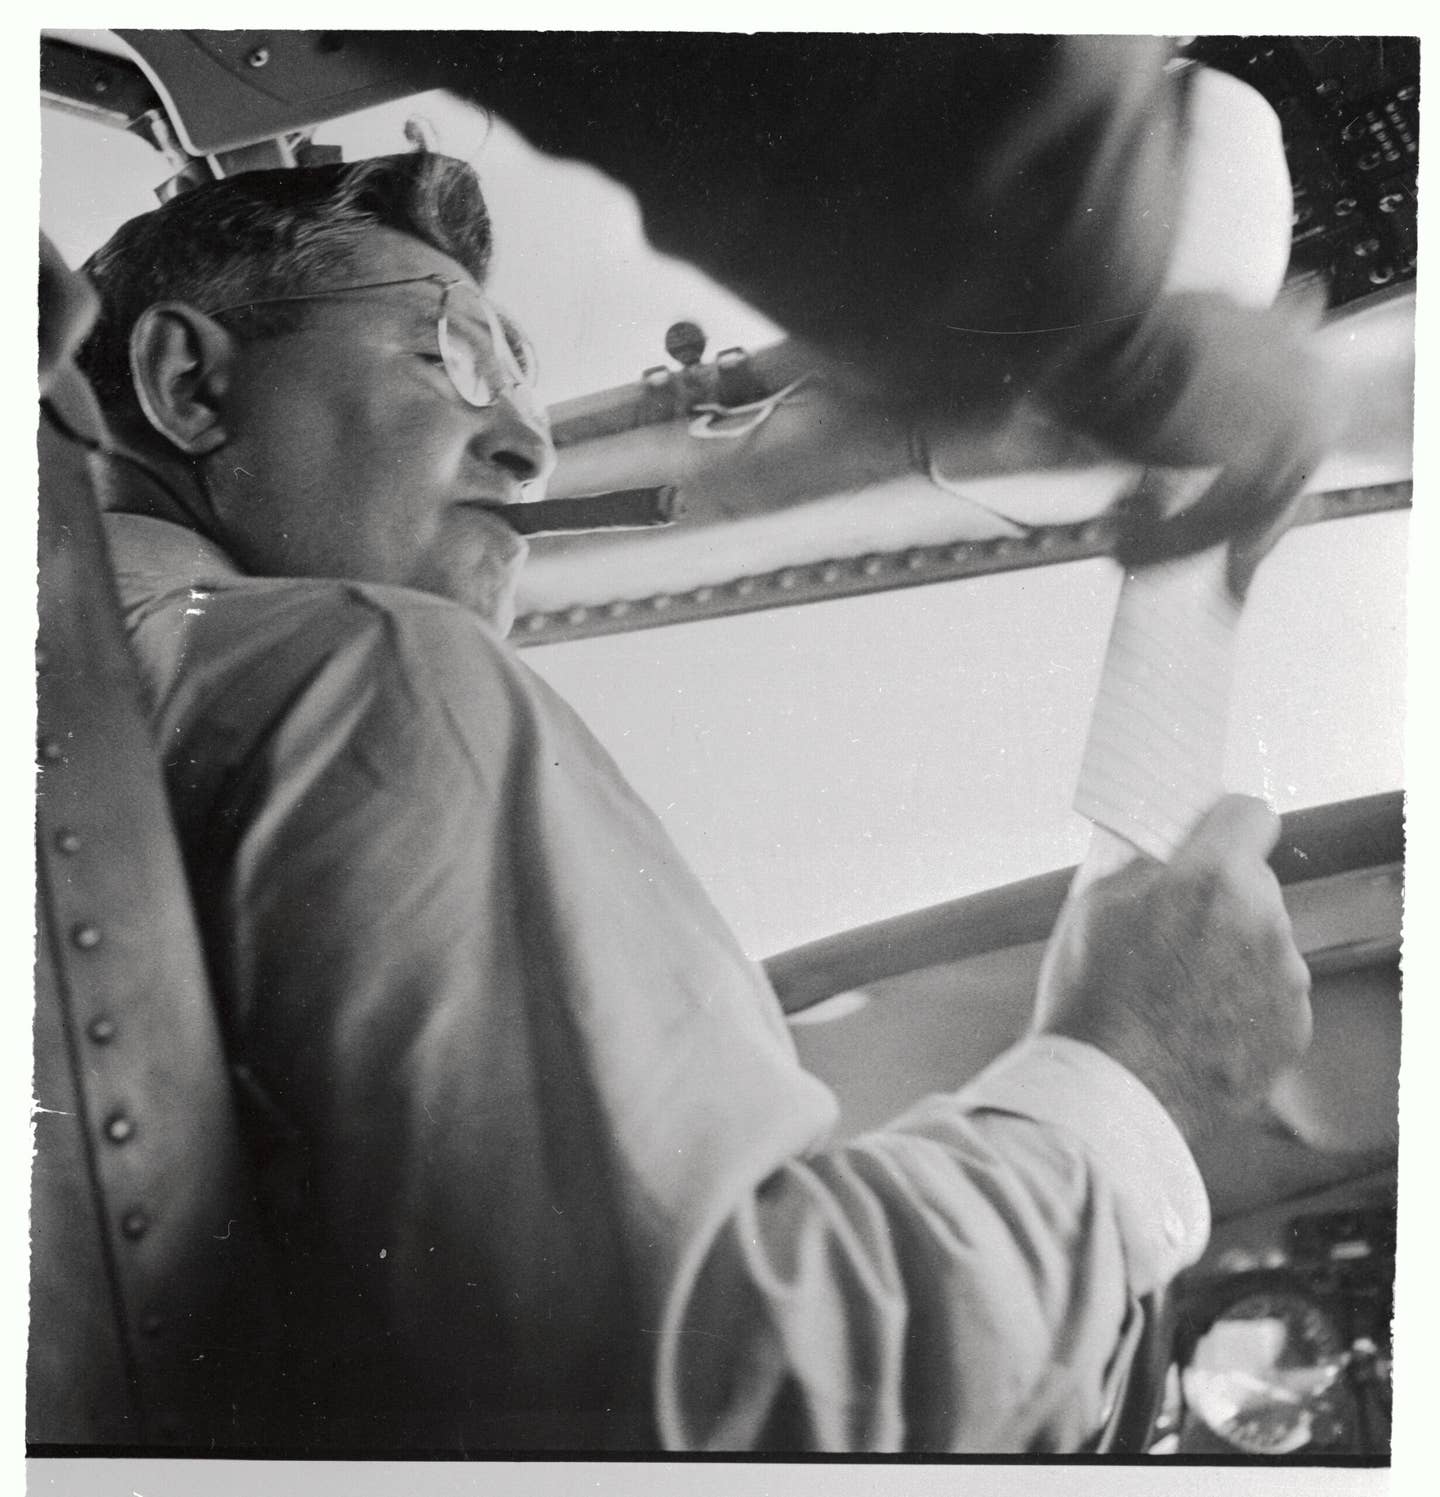 November 1957: Gen. Curtis LeMay at the controls of a KC-135 after a record-breaking flight between Westover Air Force Base, Massachusetts, and Buenos Aires, Argentina, covering 6,322 miles in 11 hours and 5 minutes. <em>Getty Images</em>